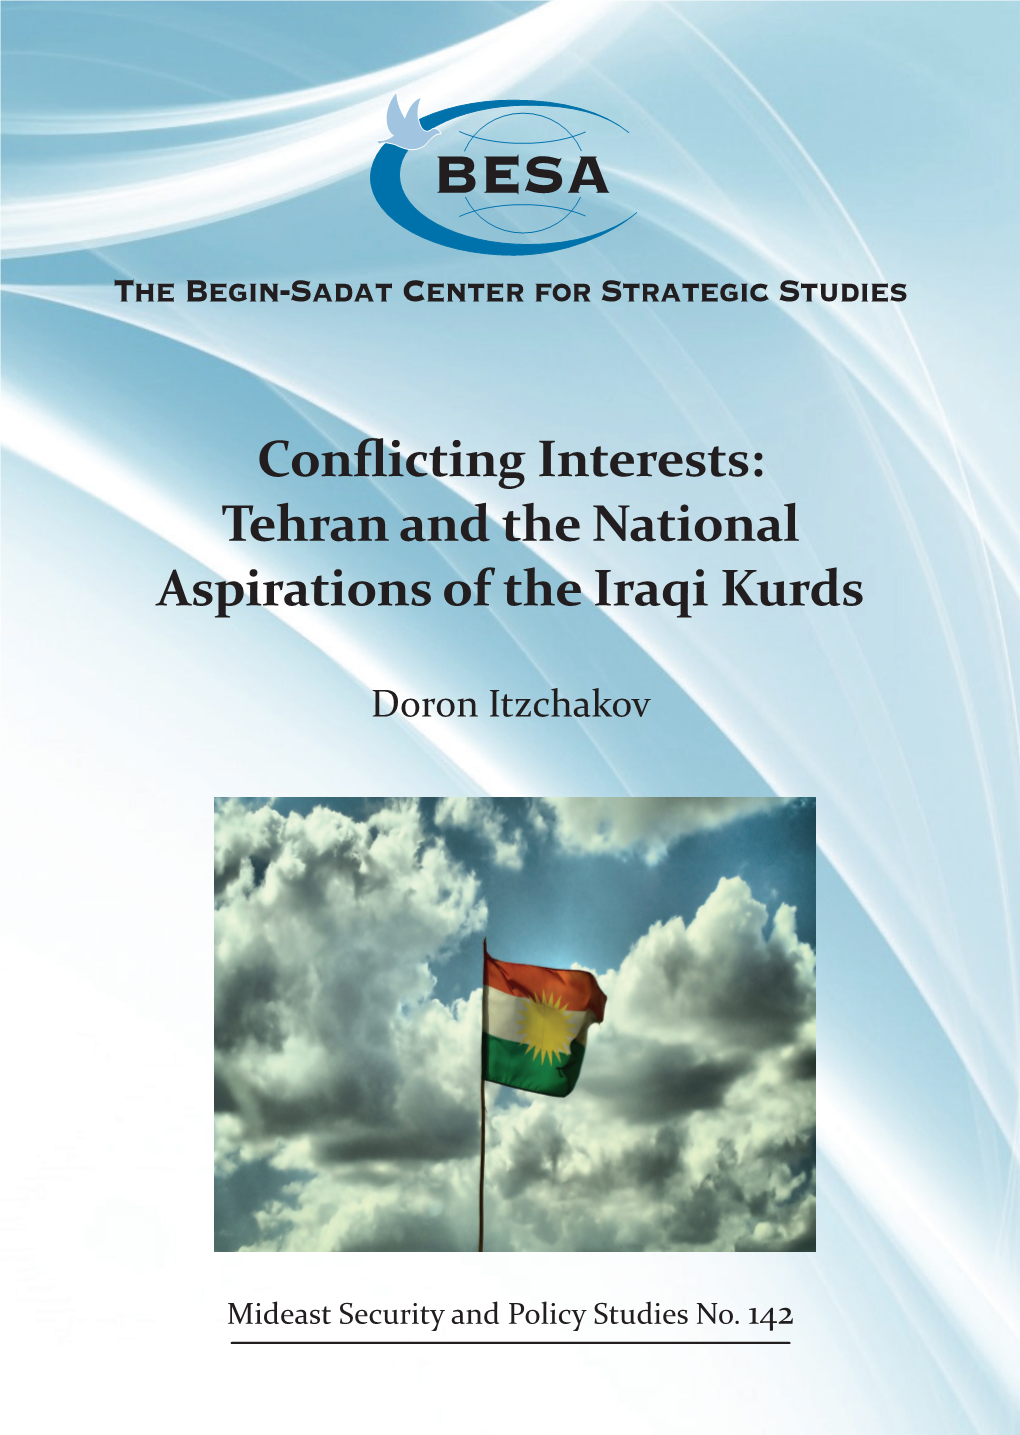 Conflicting Interests: Tehran and the National Aspirations of the Iraqi Kurds